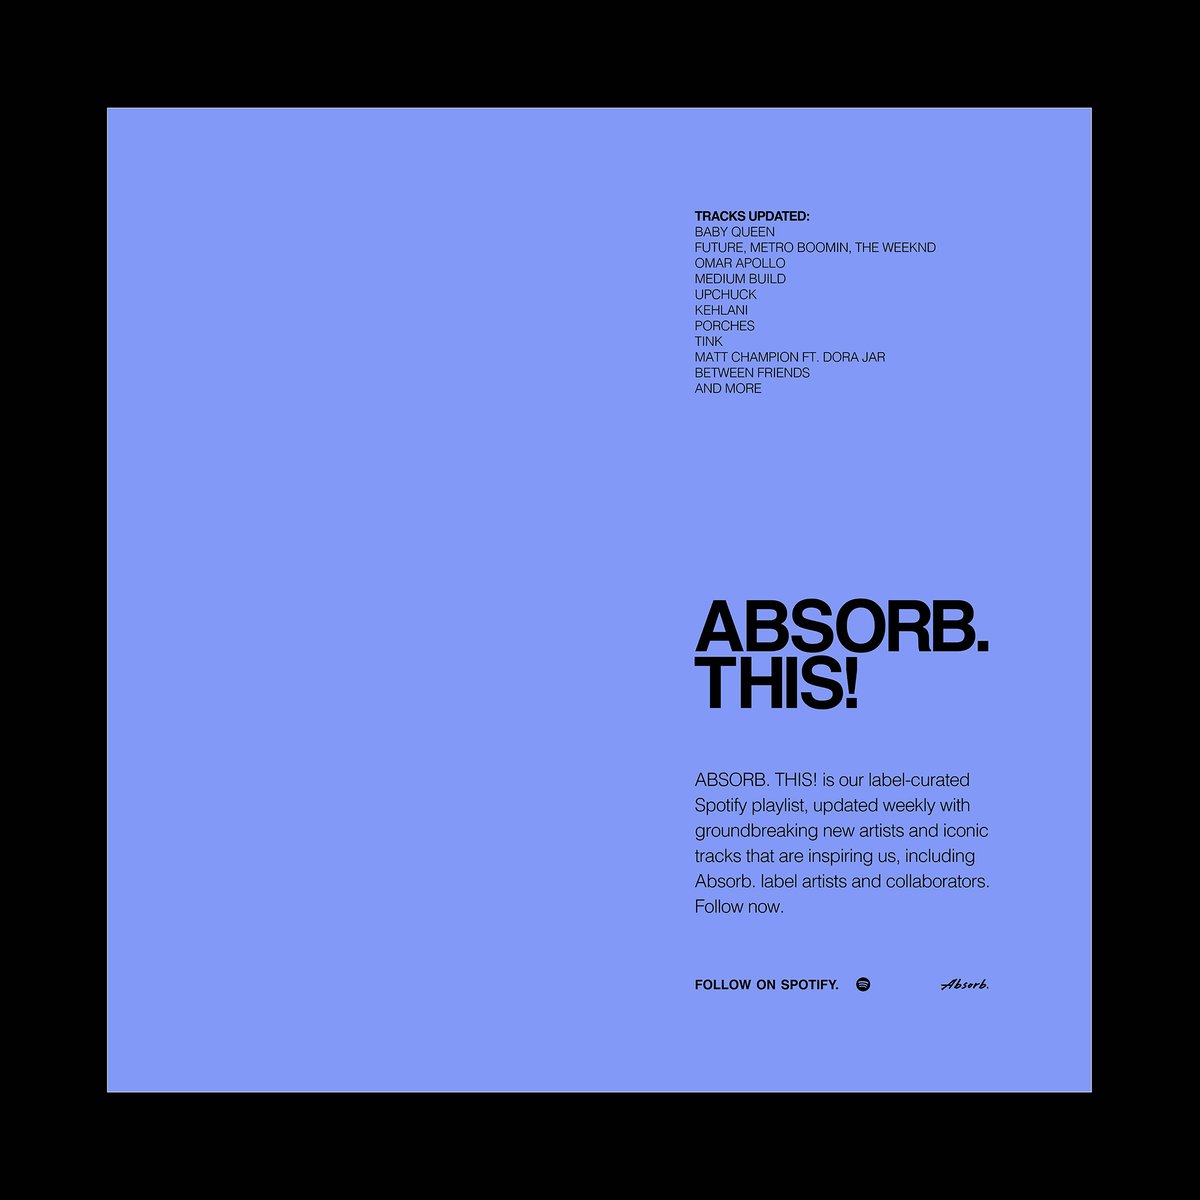 ABSORB. THIS! updated with tracks from @babyqueen, @1future, @omarapollo, @Medium_Build, @Kehlani, @porches_hiii, @Official_Tink, @BetweenFriends, and more! LISTEN NOW: bit.ly/absorbthis